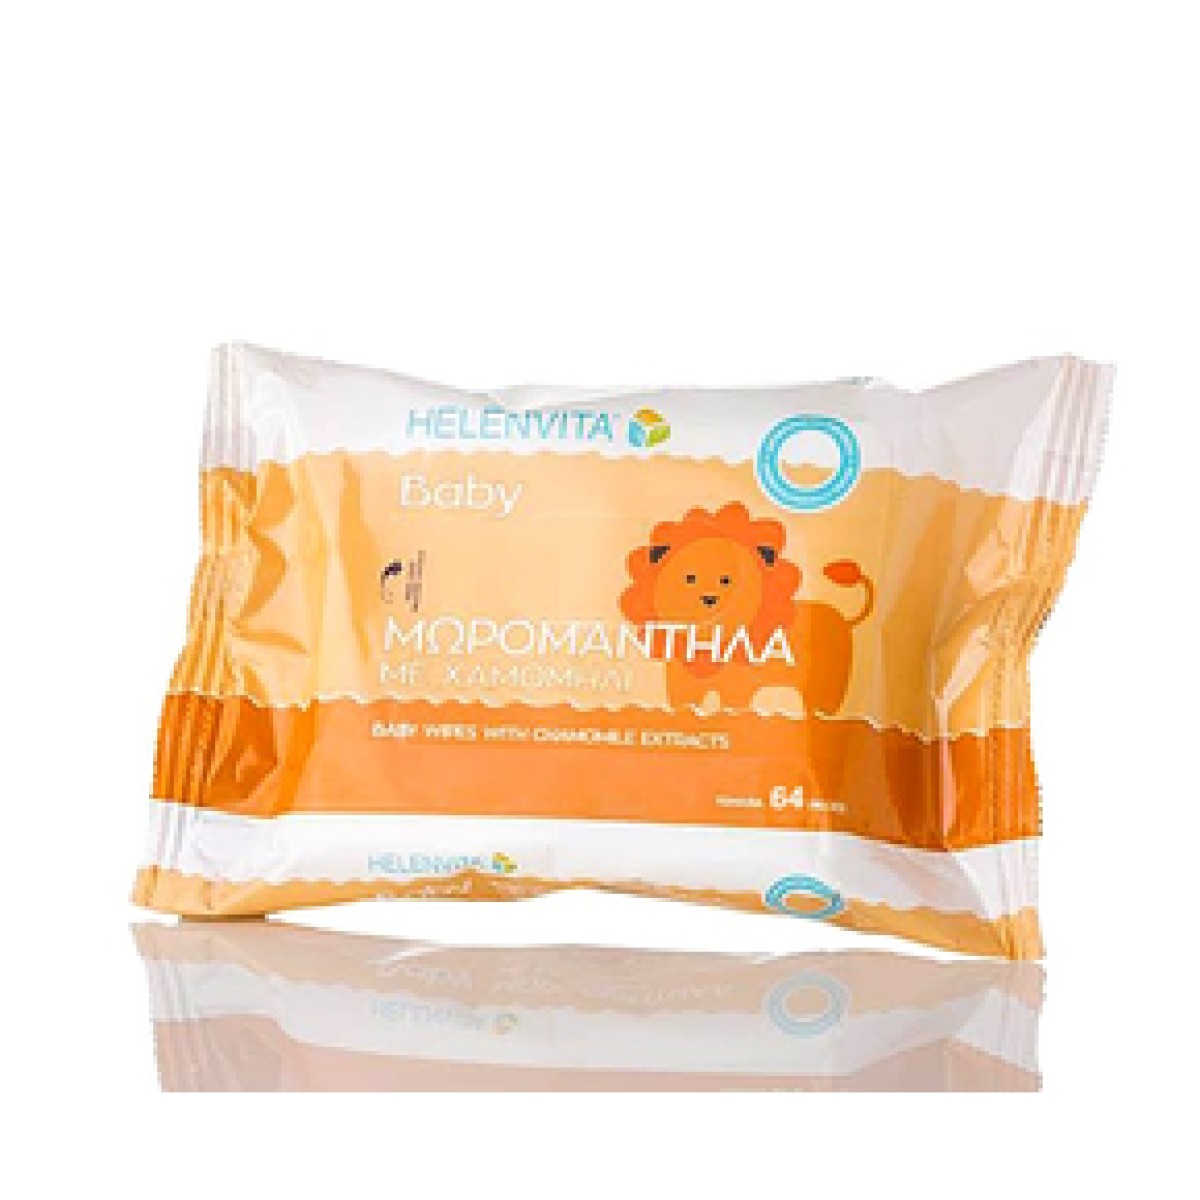 Helenvita | Baby Wipes with Chamomile Extracts | Μωρομάντιλα με Χαμομήλι | 20 τμχ